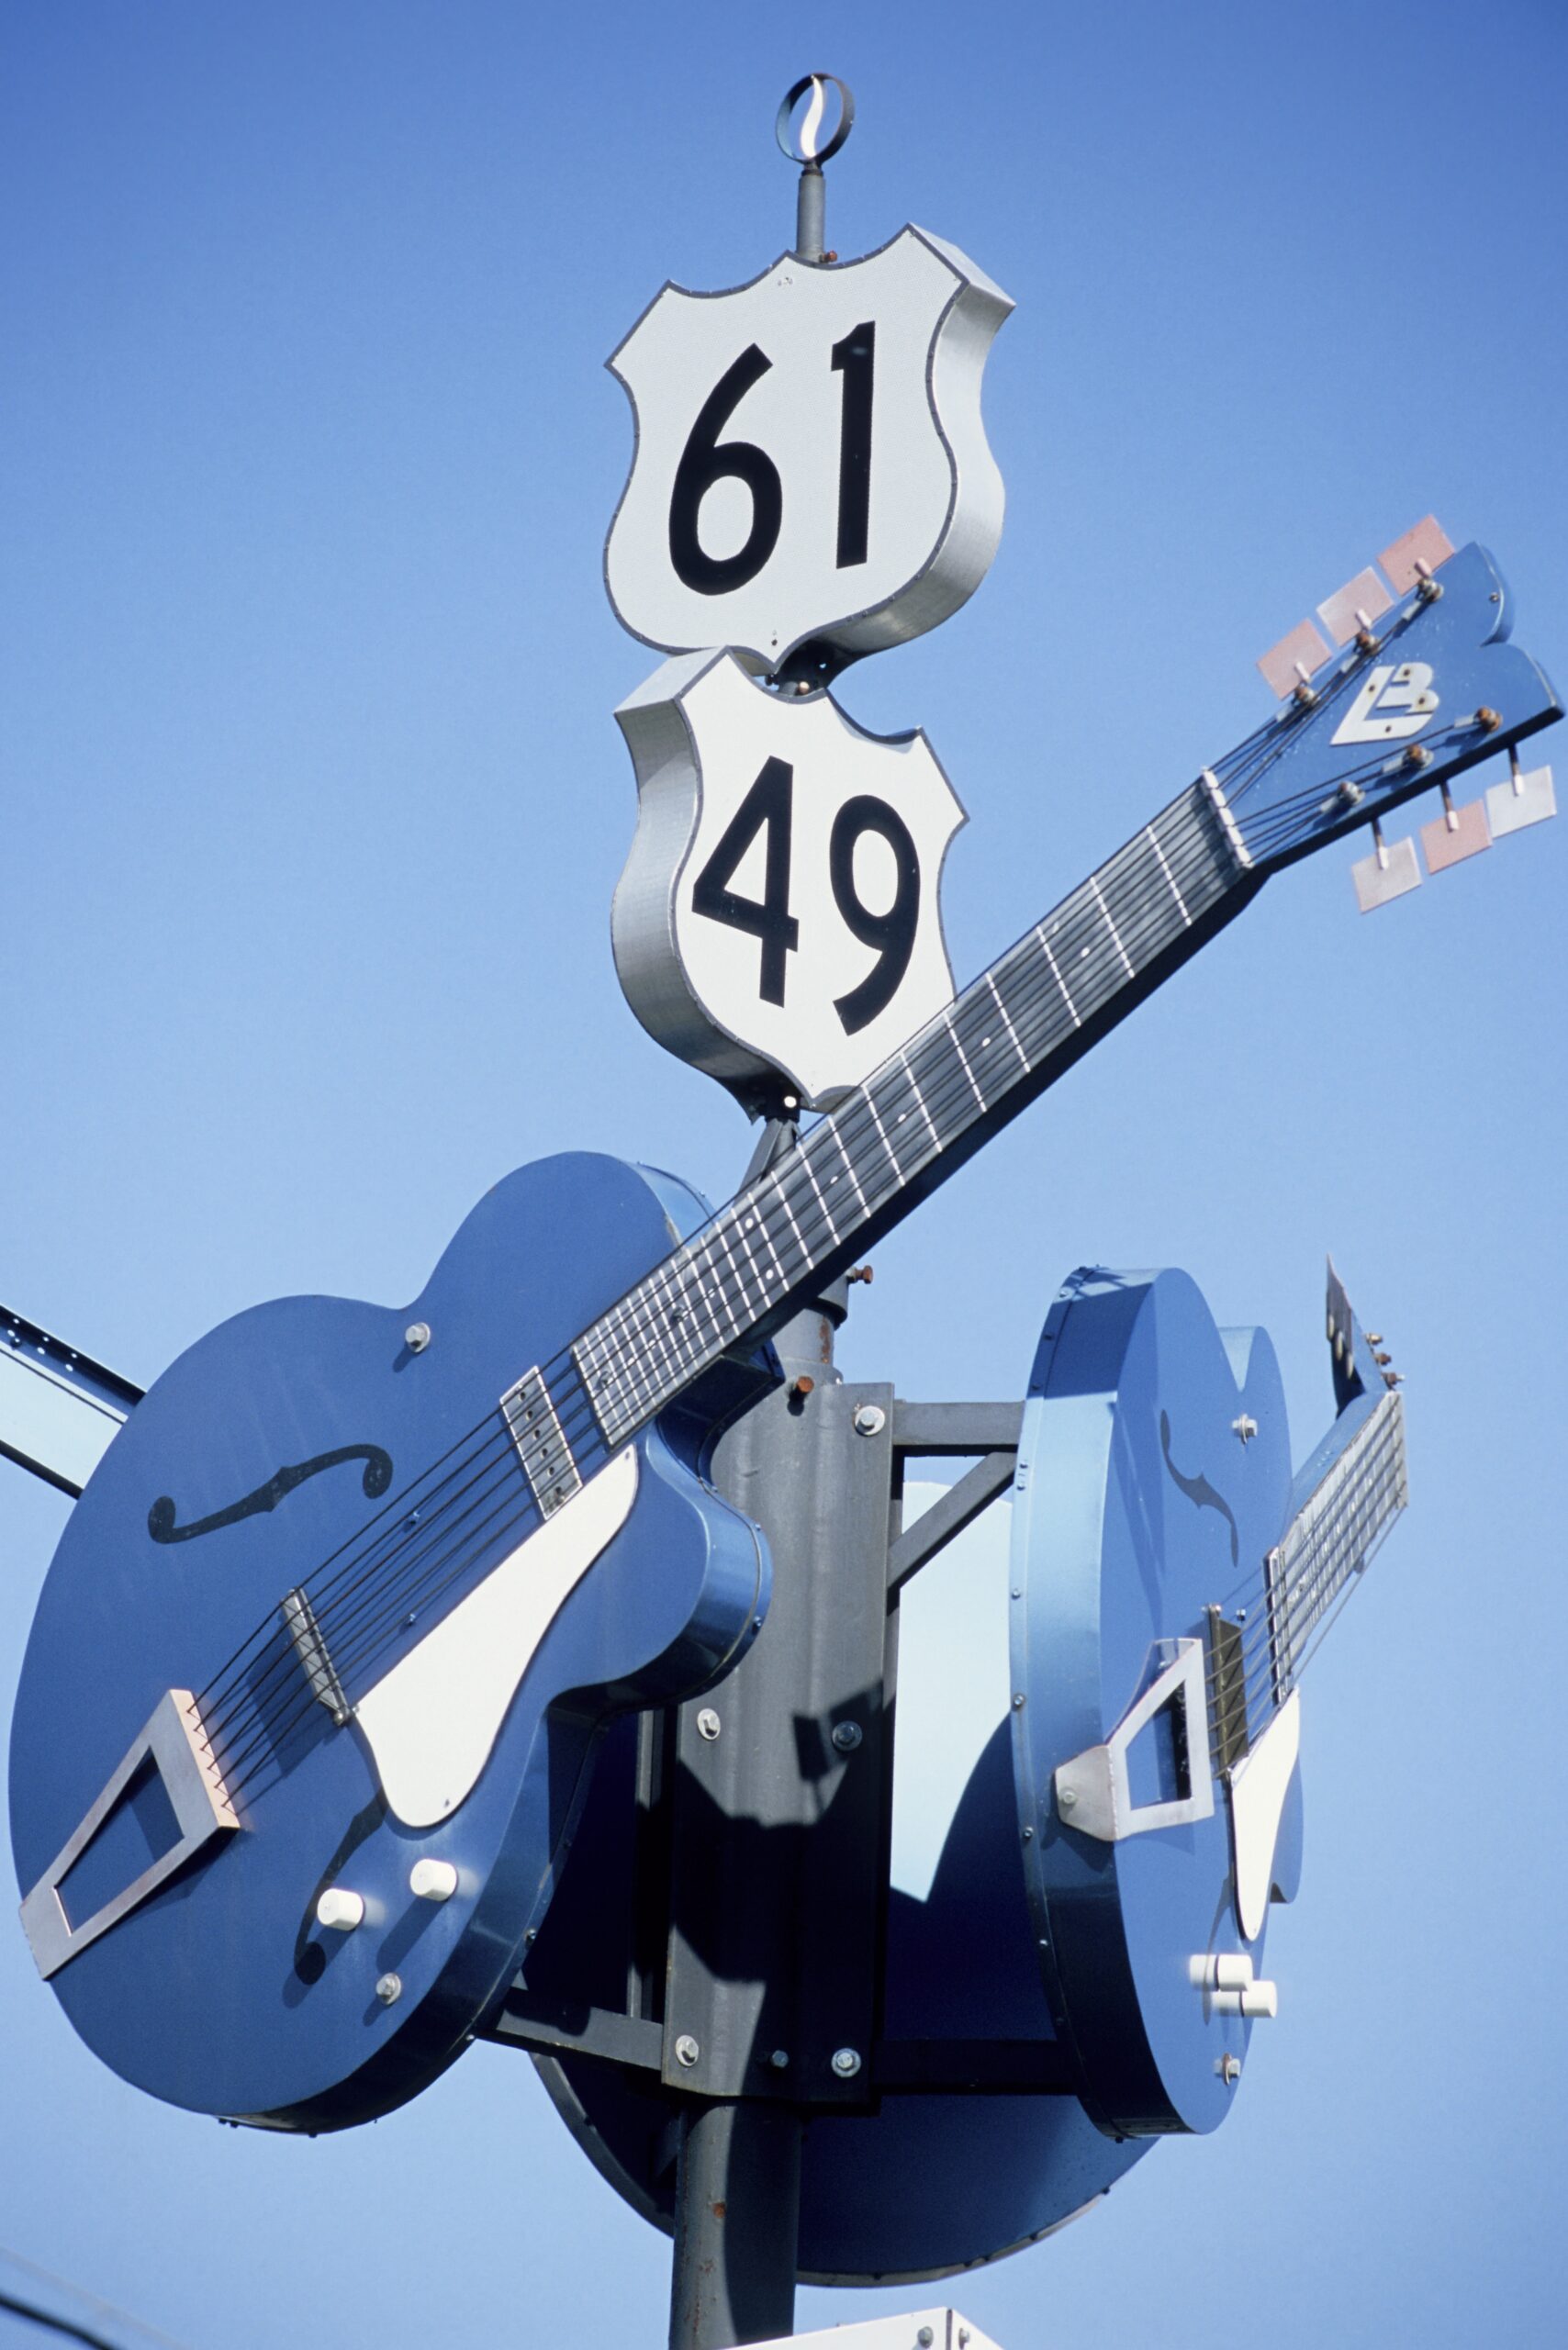 highway 61, the blues highway from lousiana through mississippi to tennessee, america